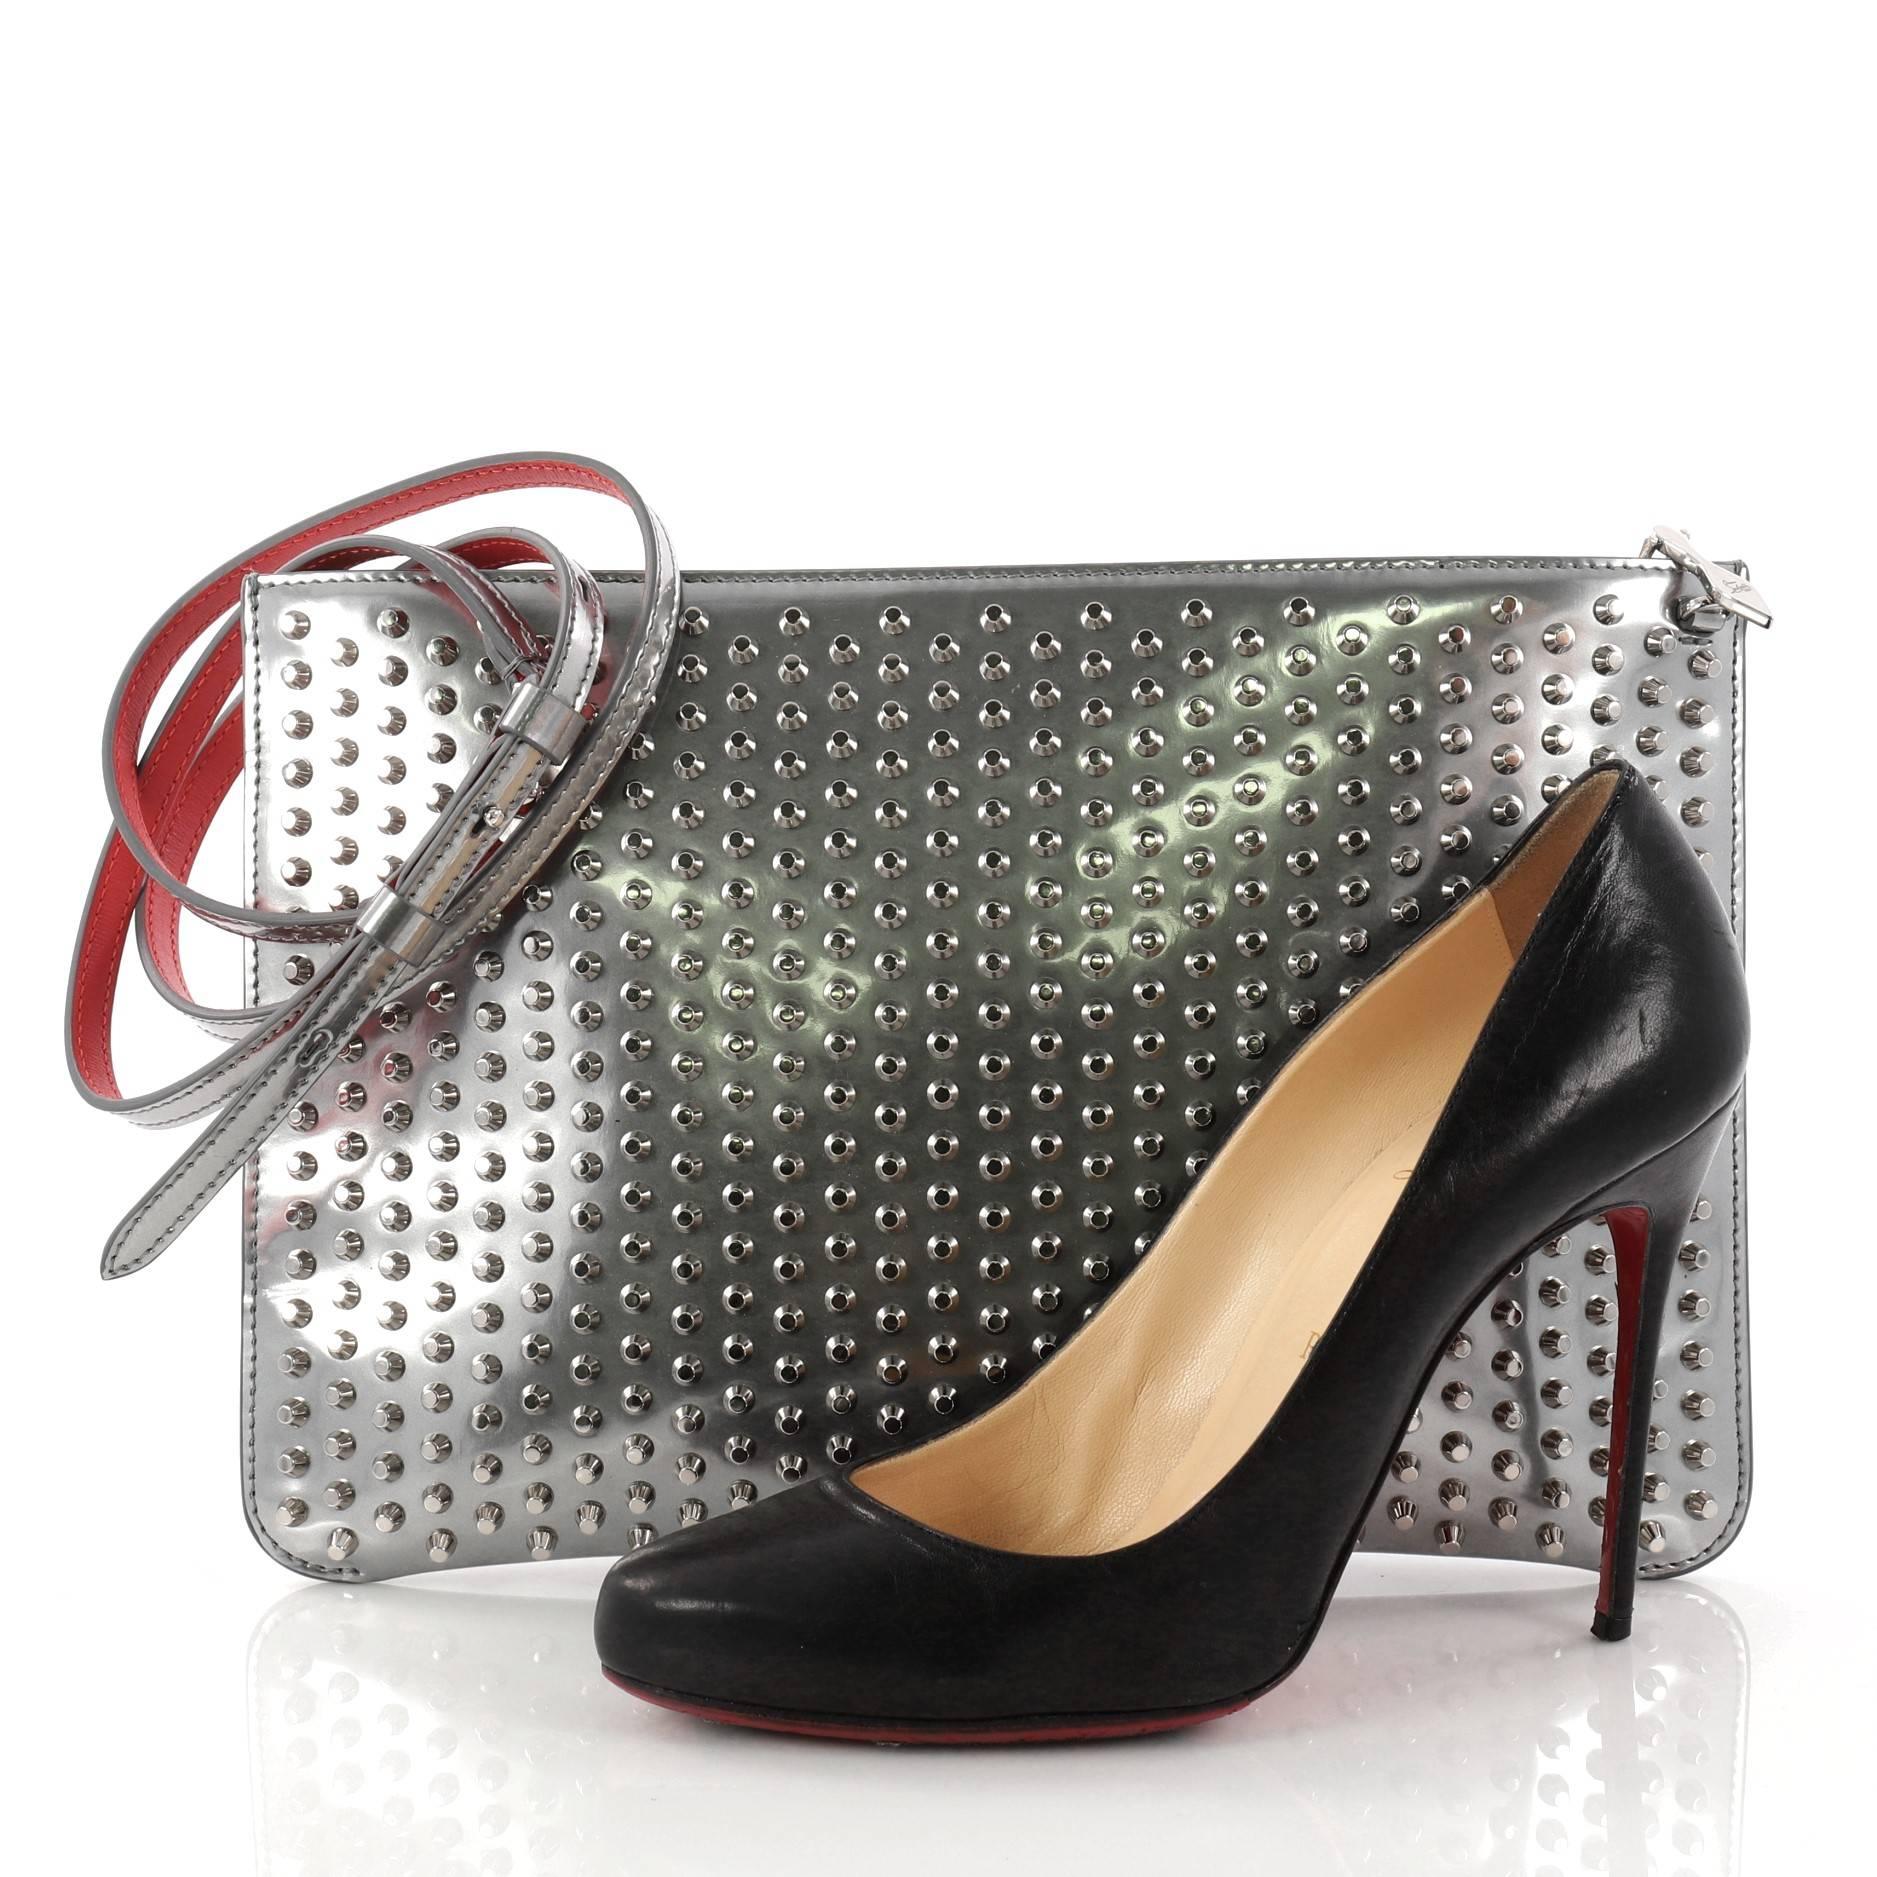 This authentic Christian Louboutin Loubiposh Clutch Spiked Patent is an edgy choice for your evening look. Crafted from silver spiked patent leather, this clutch features removable chain and leather shoulder strap, red enamel Louboutin logo zipper